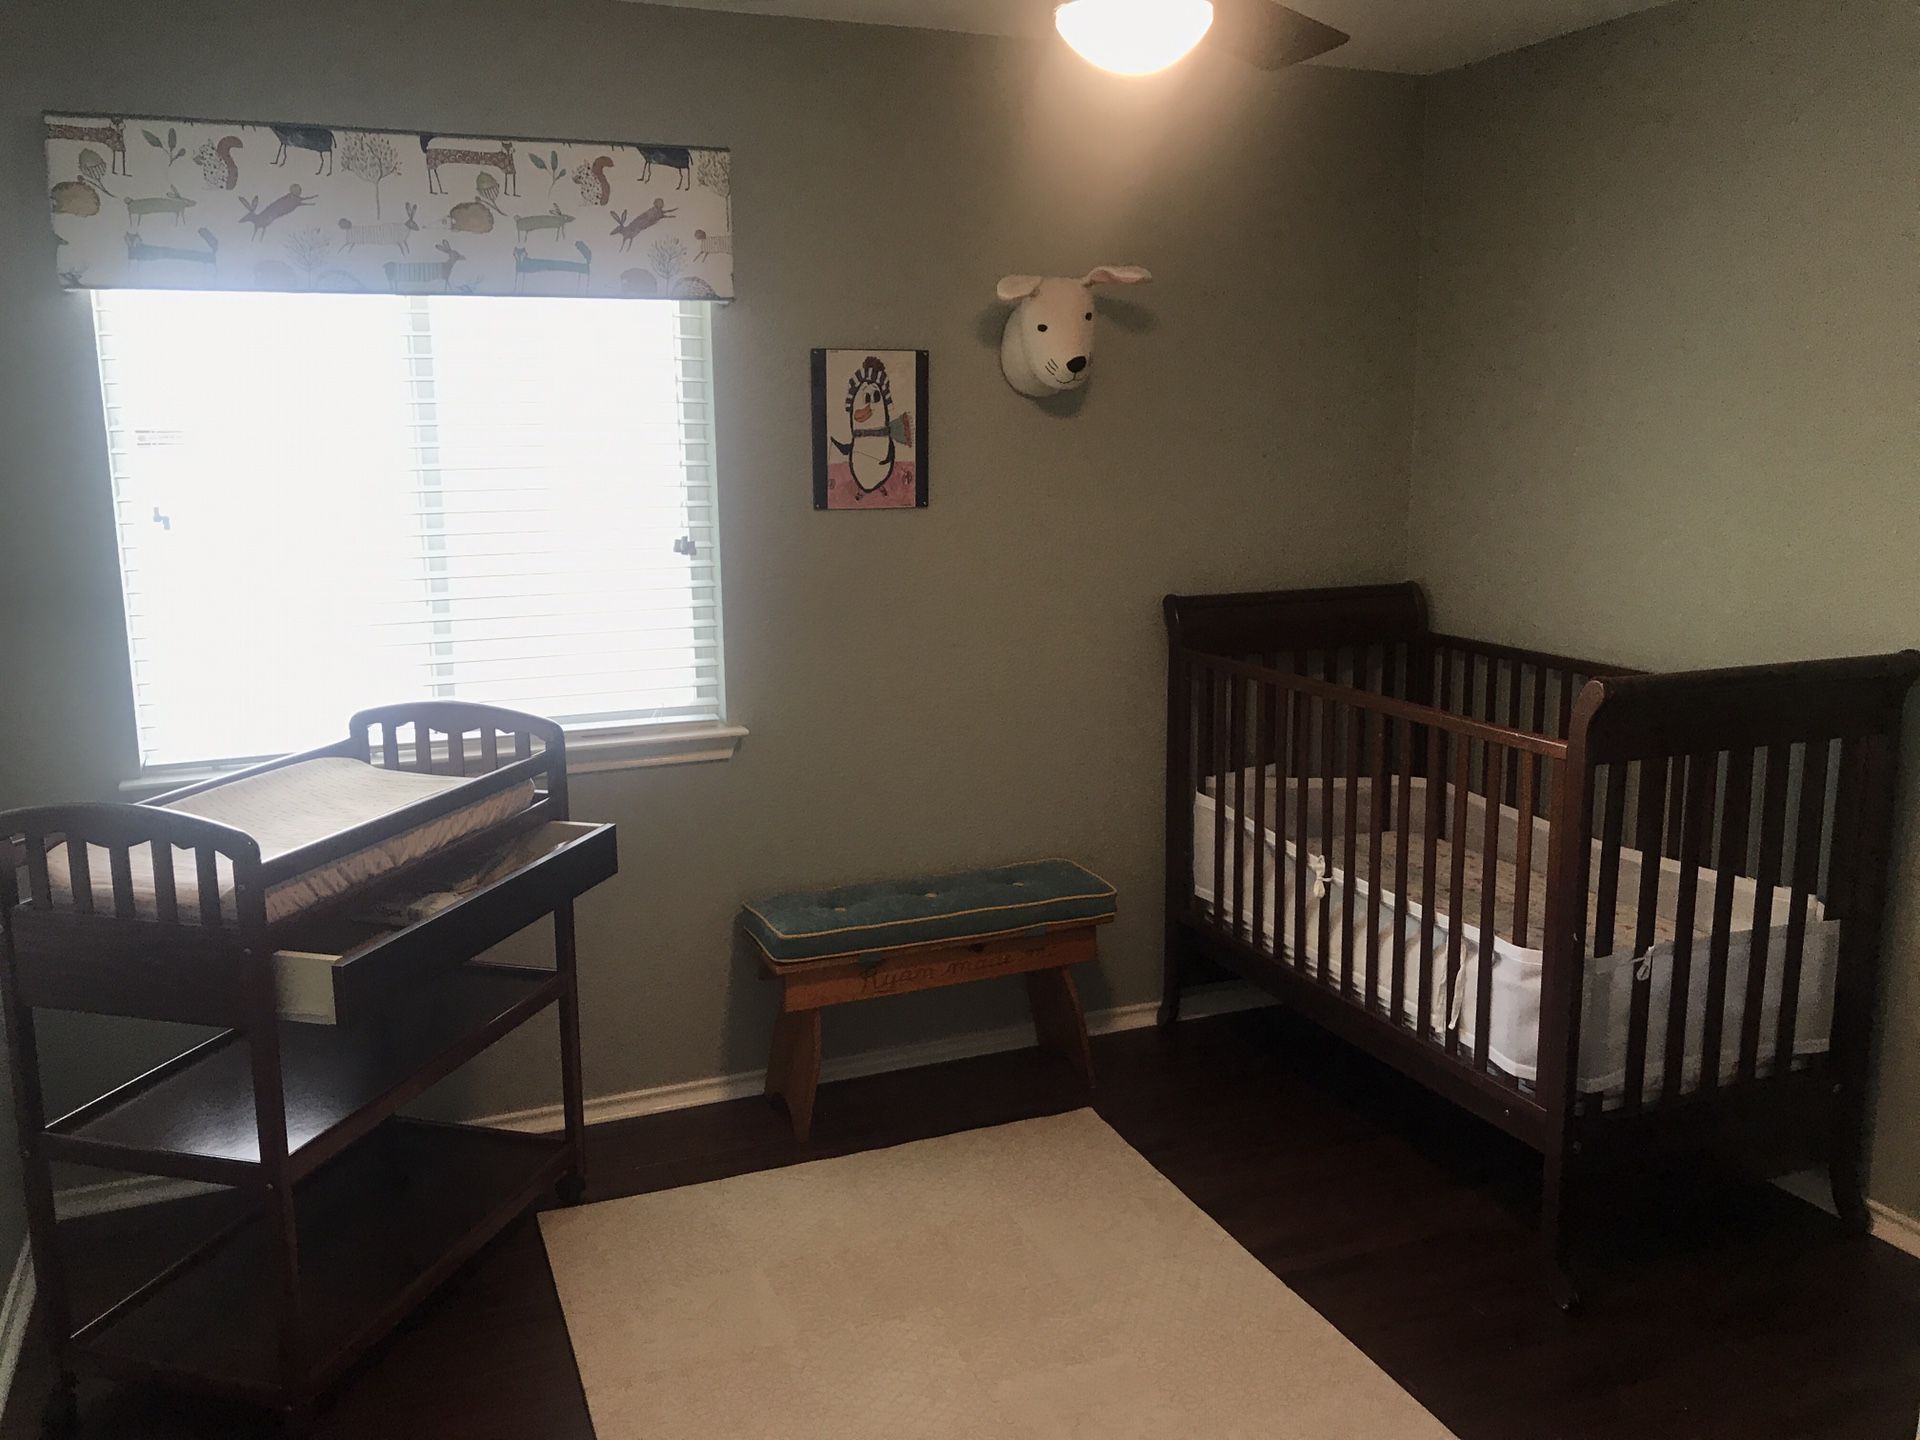 Crib and diaper changing table